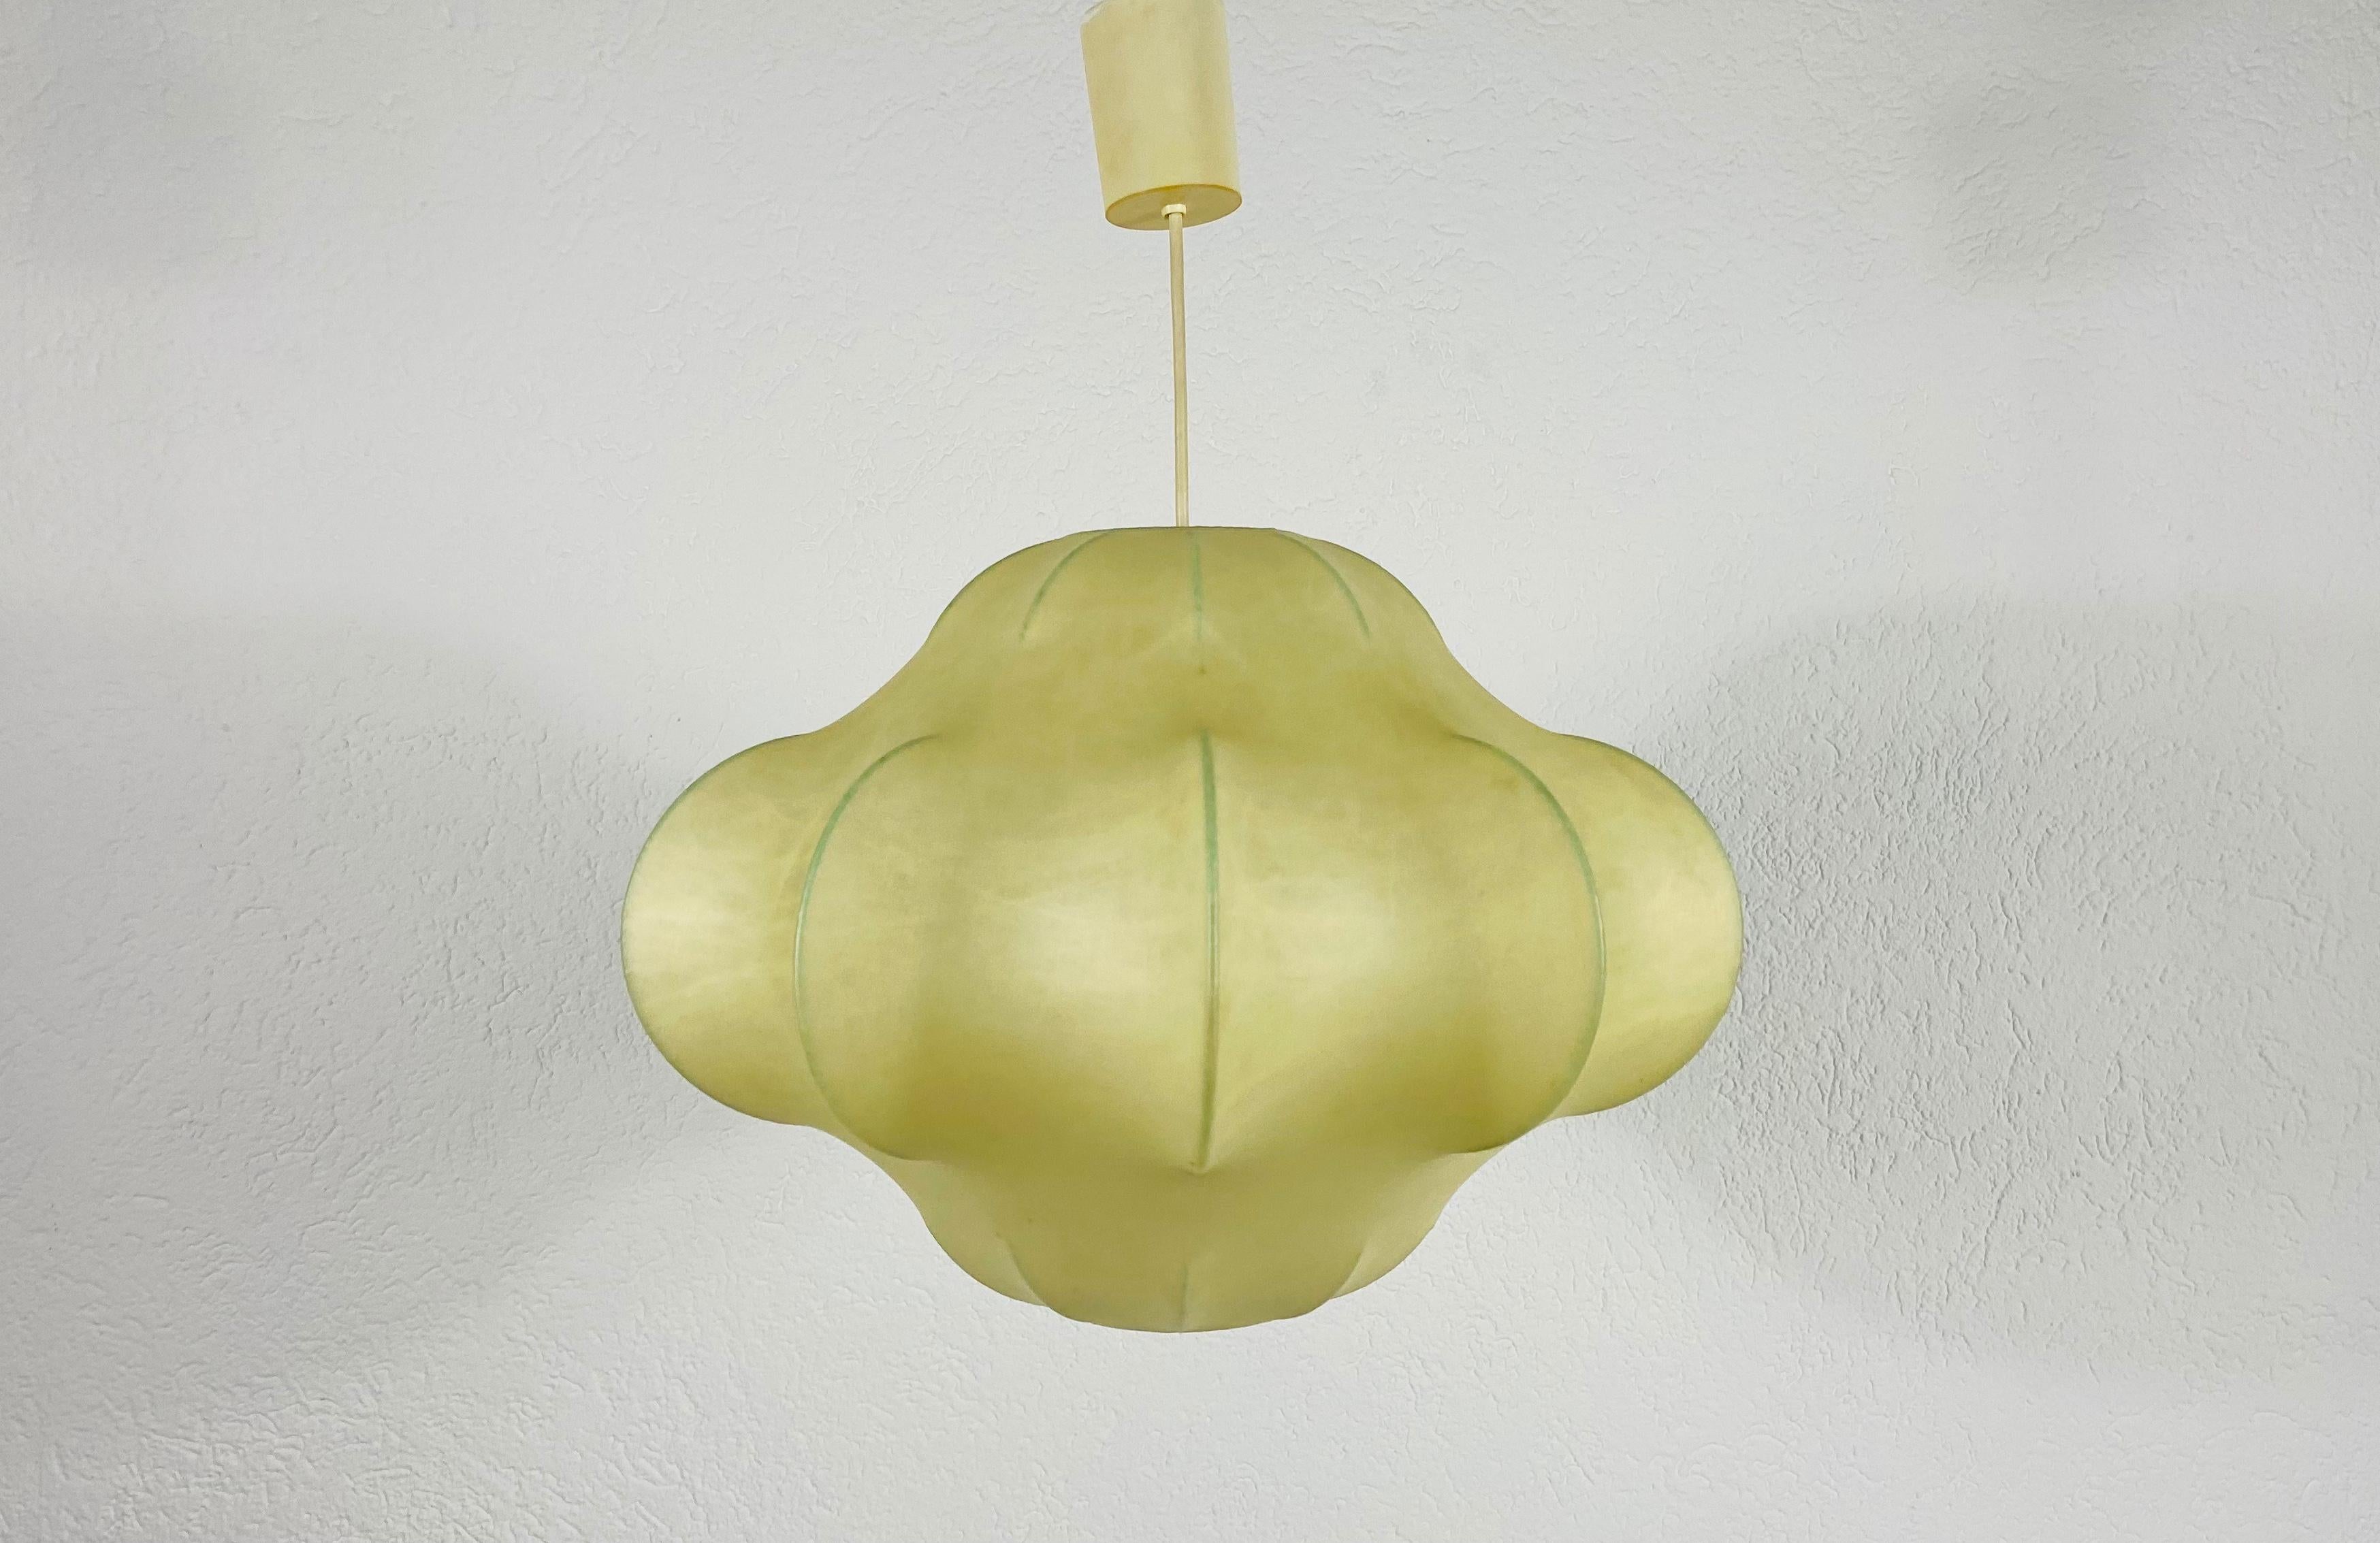 A cocoon pendant lamp made in Italy in the 1960s. The hanging lamp has been manufactured in the design of the lamps made by Achille Castiglioni. The lamp shade is of original cocoon and has an organic shape. 

Measures: Max height 52 cm
Height 33